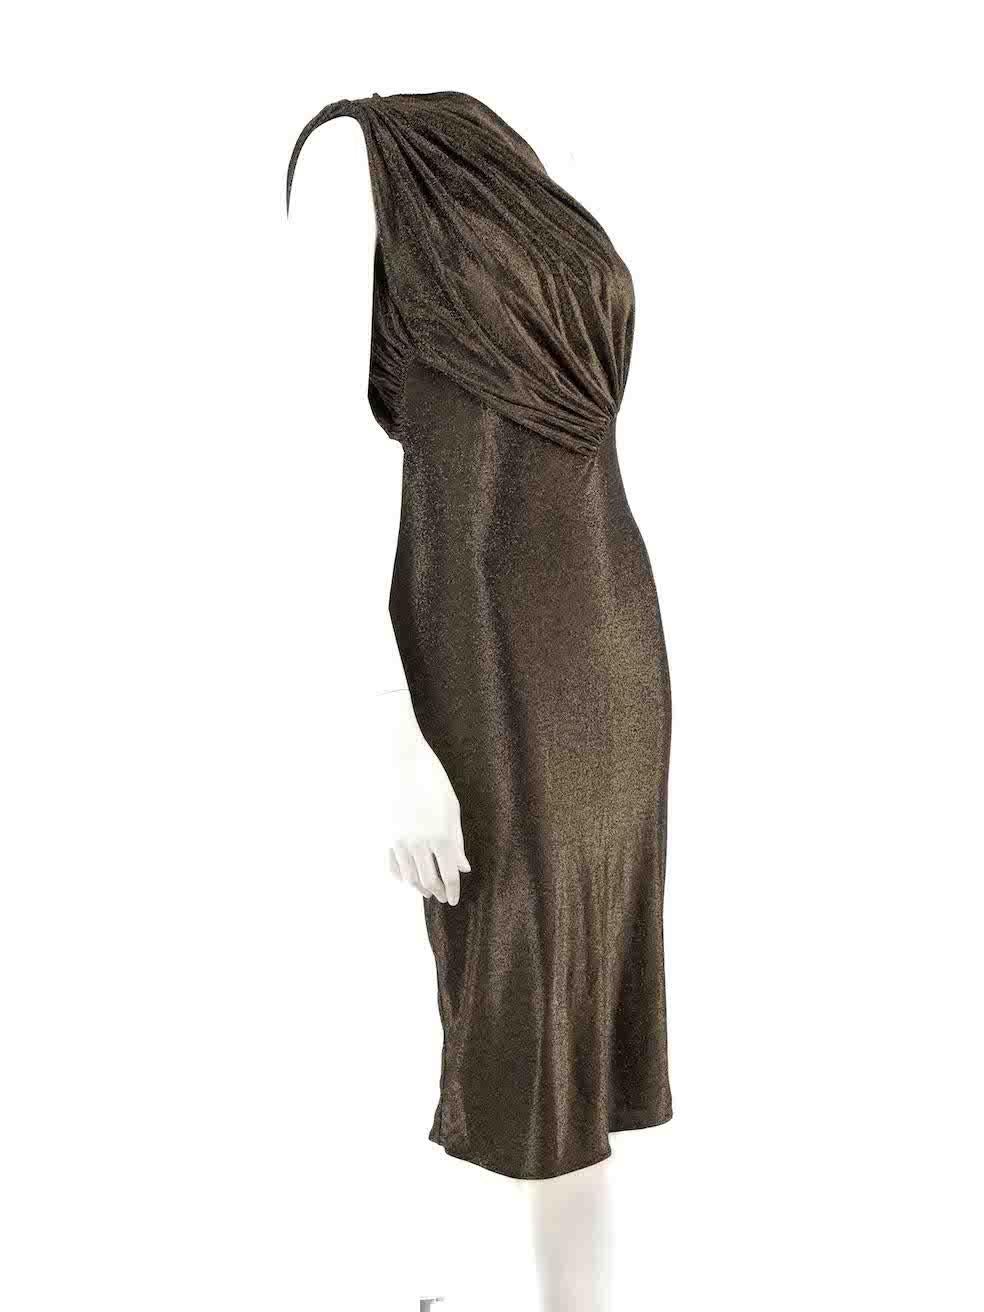 CONDITION is Very good. Minimal wear to dress is evident. Minimal wear to left side seam where a tiny cut is visible on this used Rick Owens Lilies designer resale item.
 
 
 
 Details
 
 
 Gold - metallic thread
 
 Viscose
 
 Bodycon dress
 
